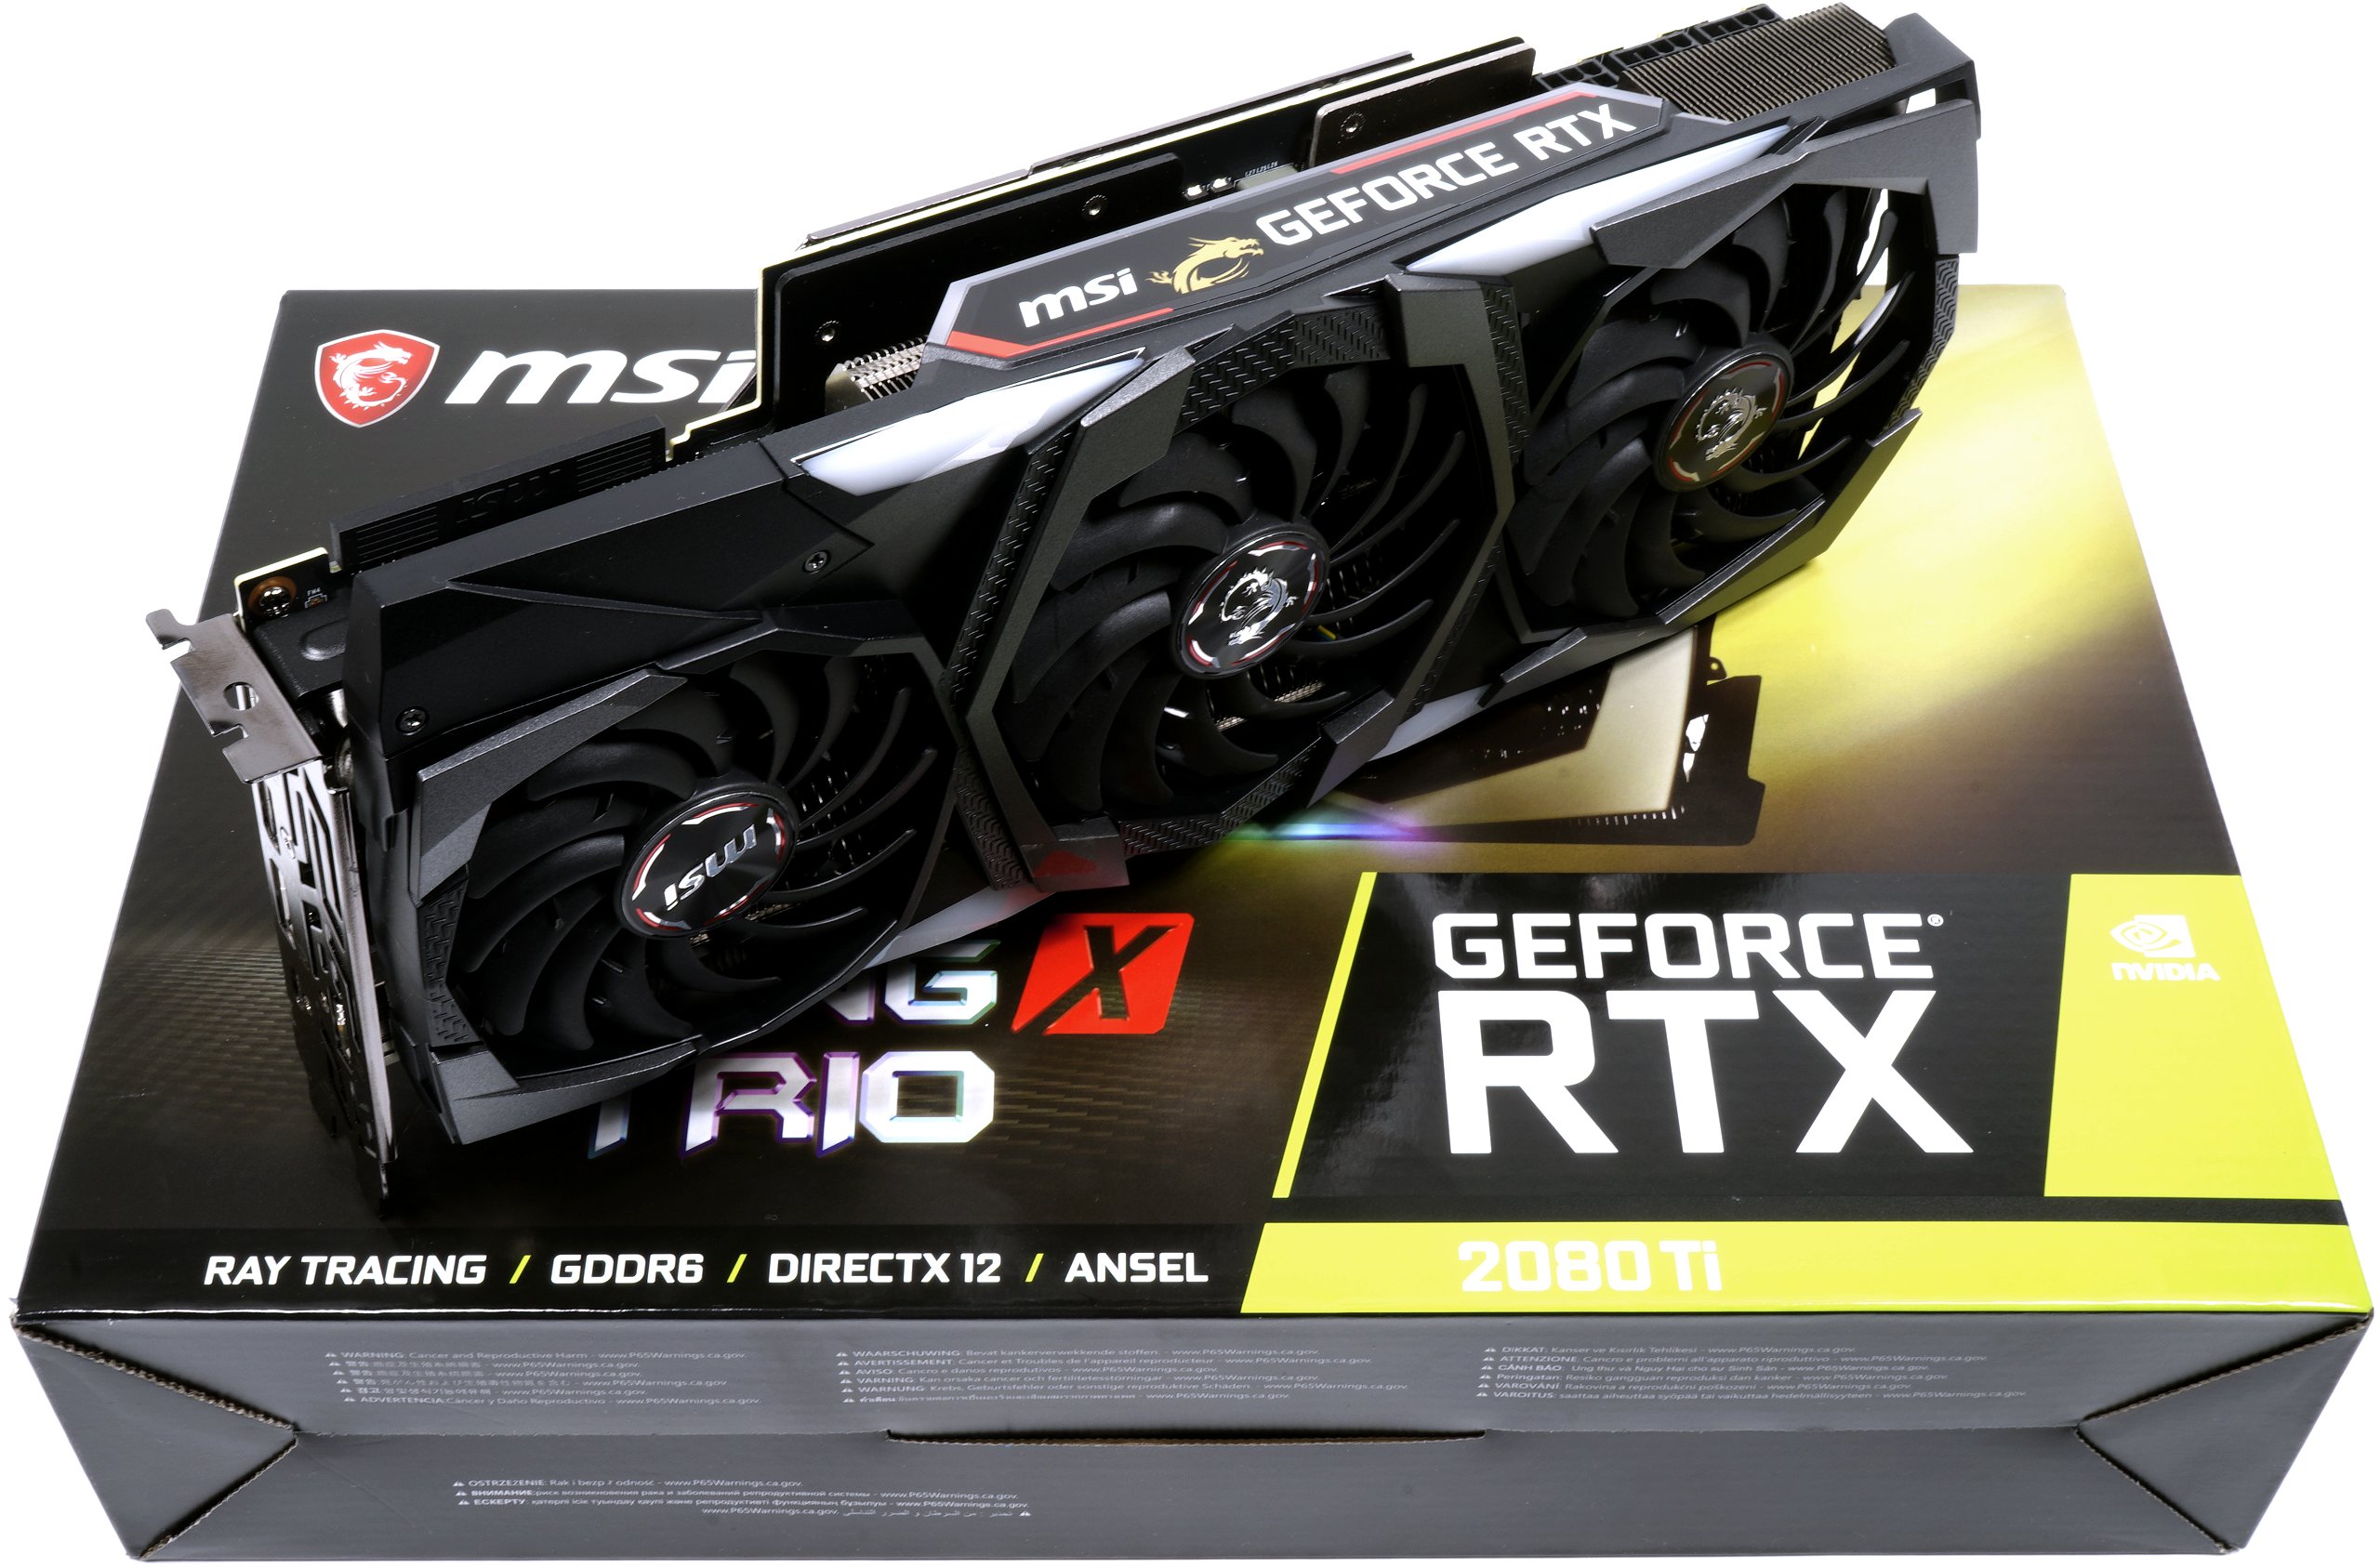 MSI GeForce RTX 2080 Ti Gaming X Trio in review - thick jaws, cool 